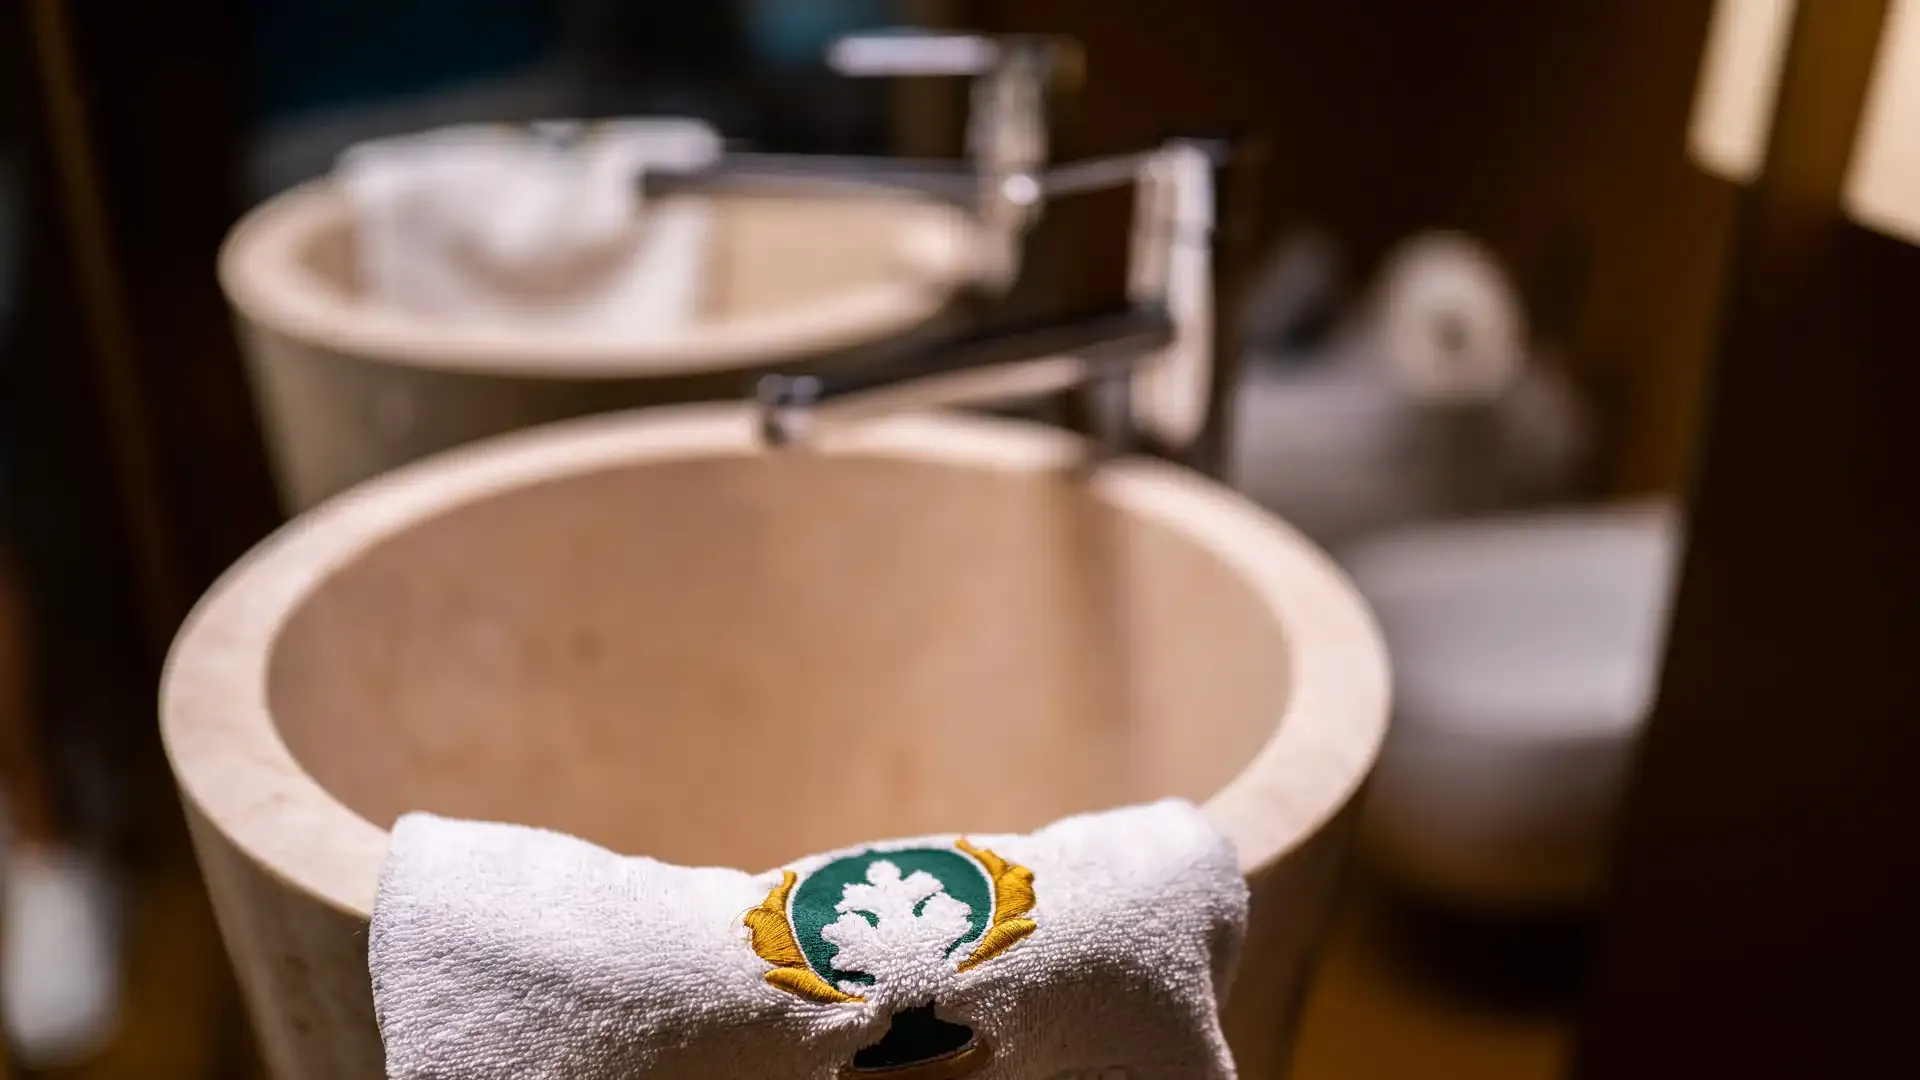 Sink with embroidered white towel from Palazzo Scotto.